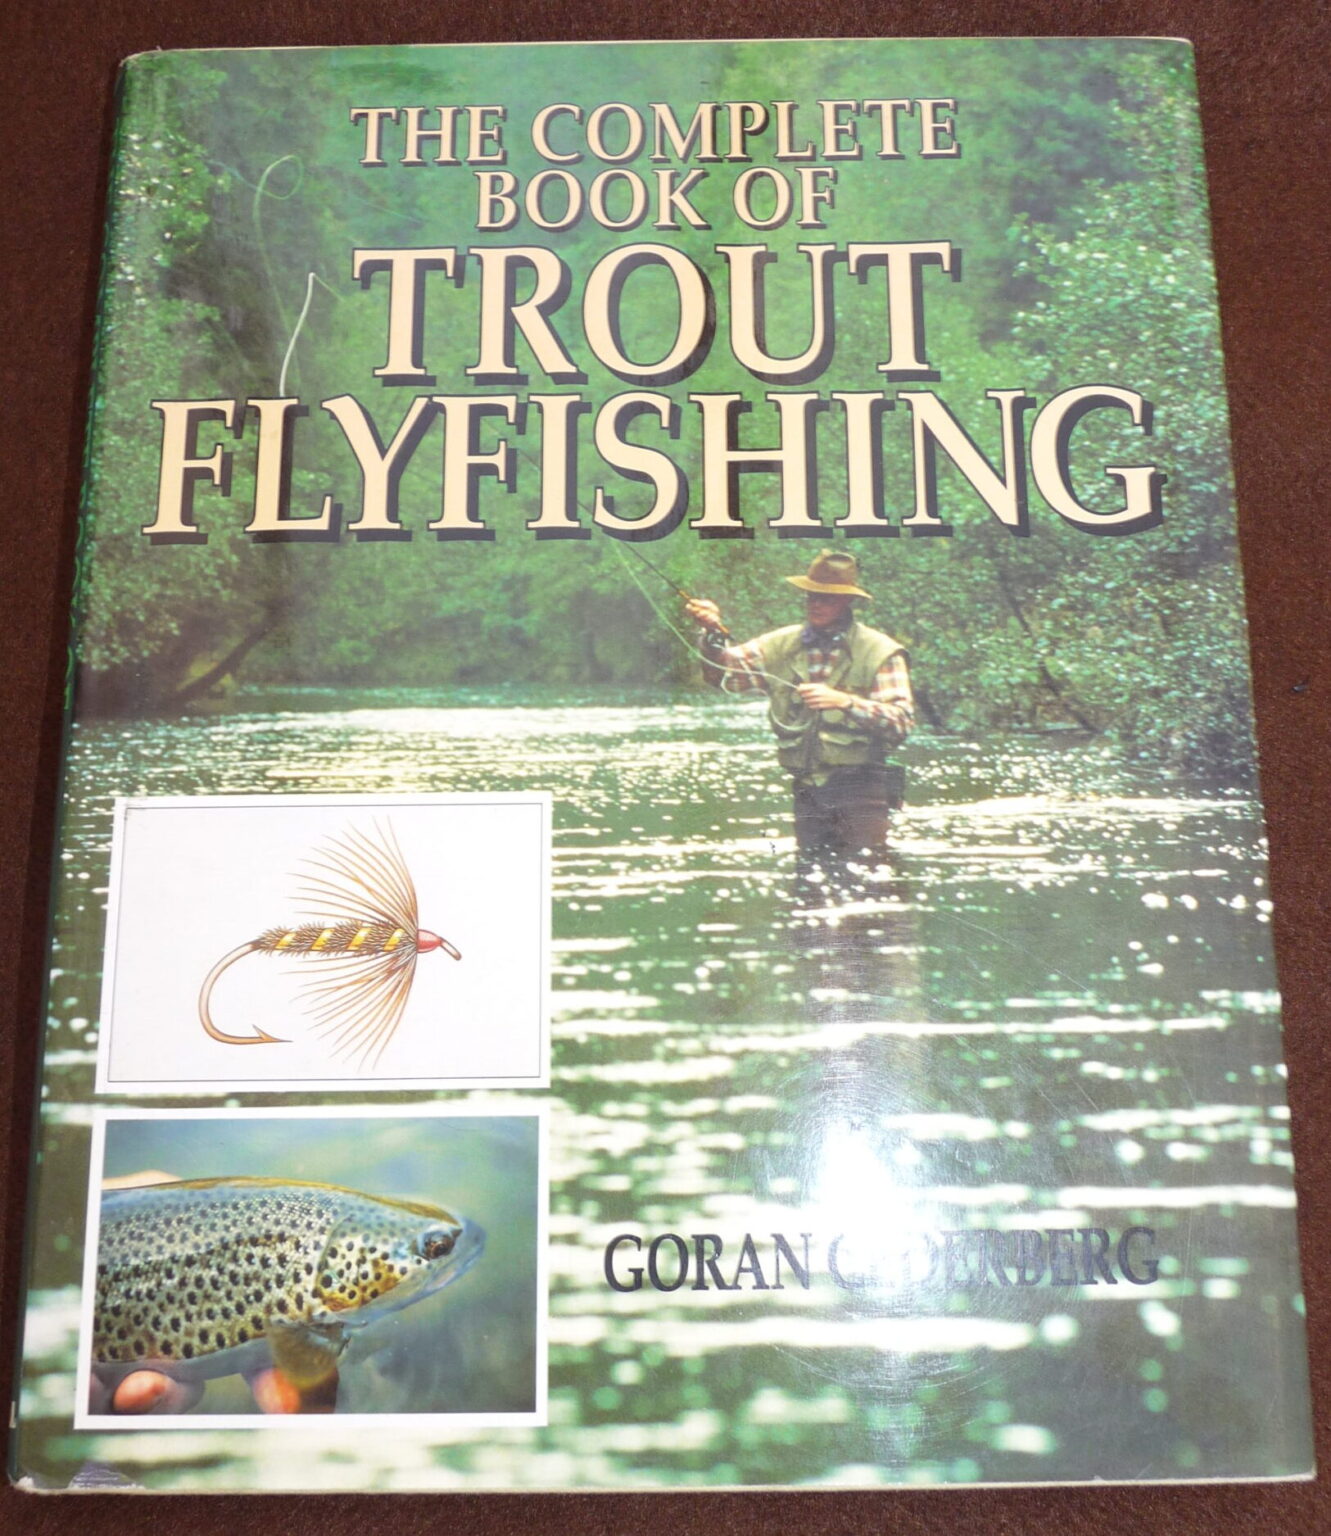 The complete Book of Trout Flyfishing, Goran Cederberg, 1997 edition book